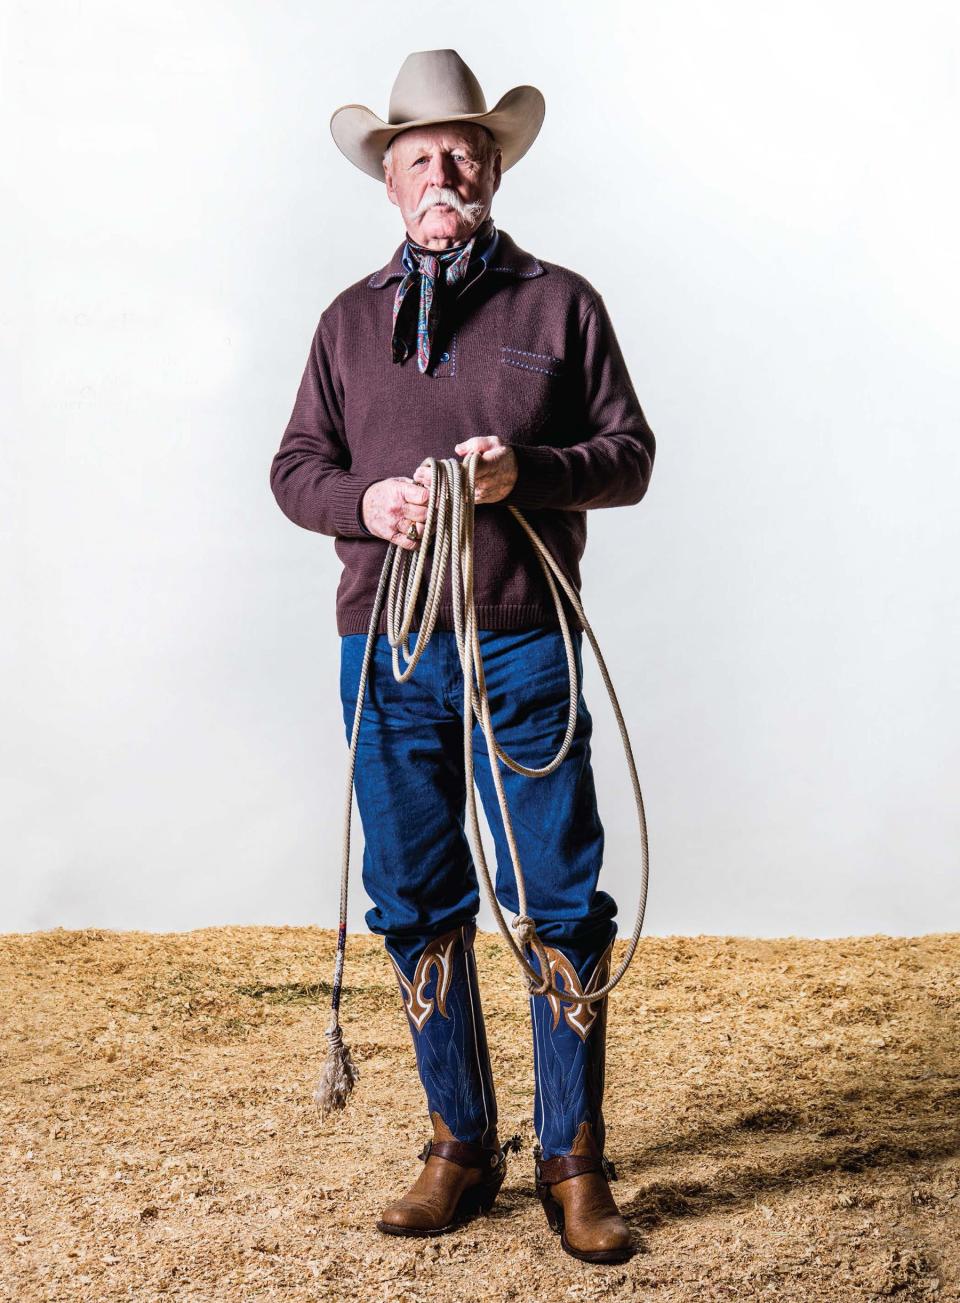 Craig Haythorn, fourth generation owner and operator of Haythorn Land & Cattle Co., will receive the 45th National Golden Spur Award. Established in 1978, the award has been conferred upon iconic industry leaders whose unparalleled devotion to land and livestock has earned them notable respect and admiration from their peers.